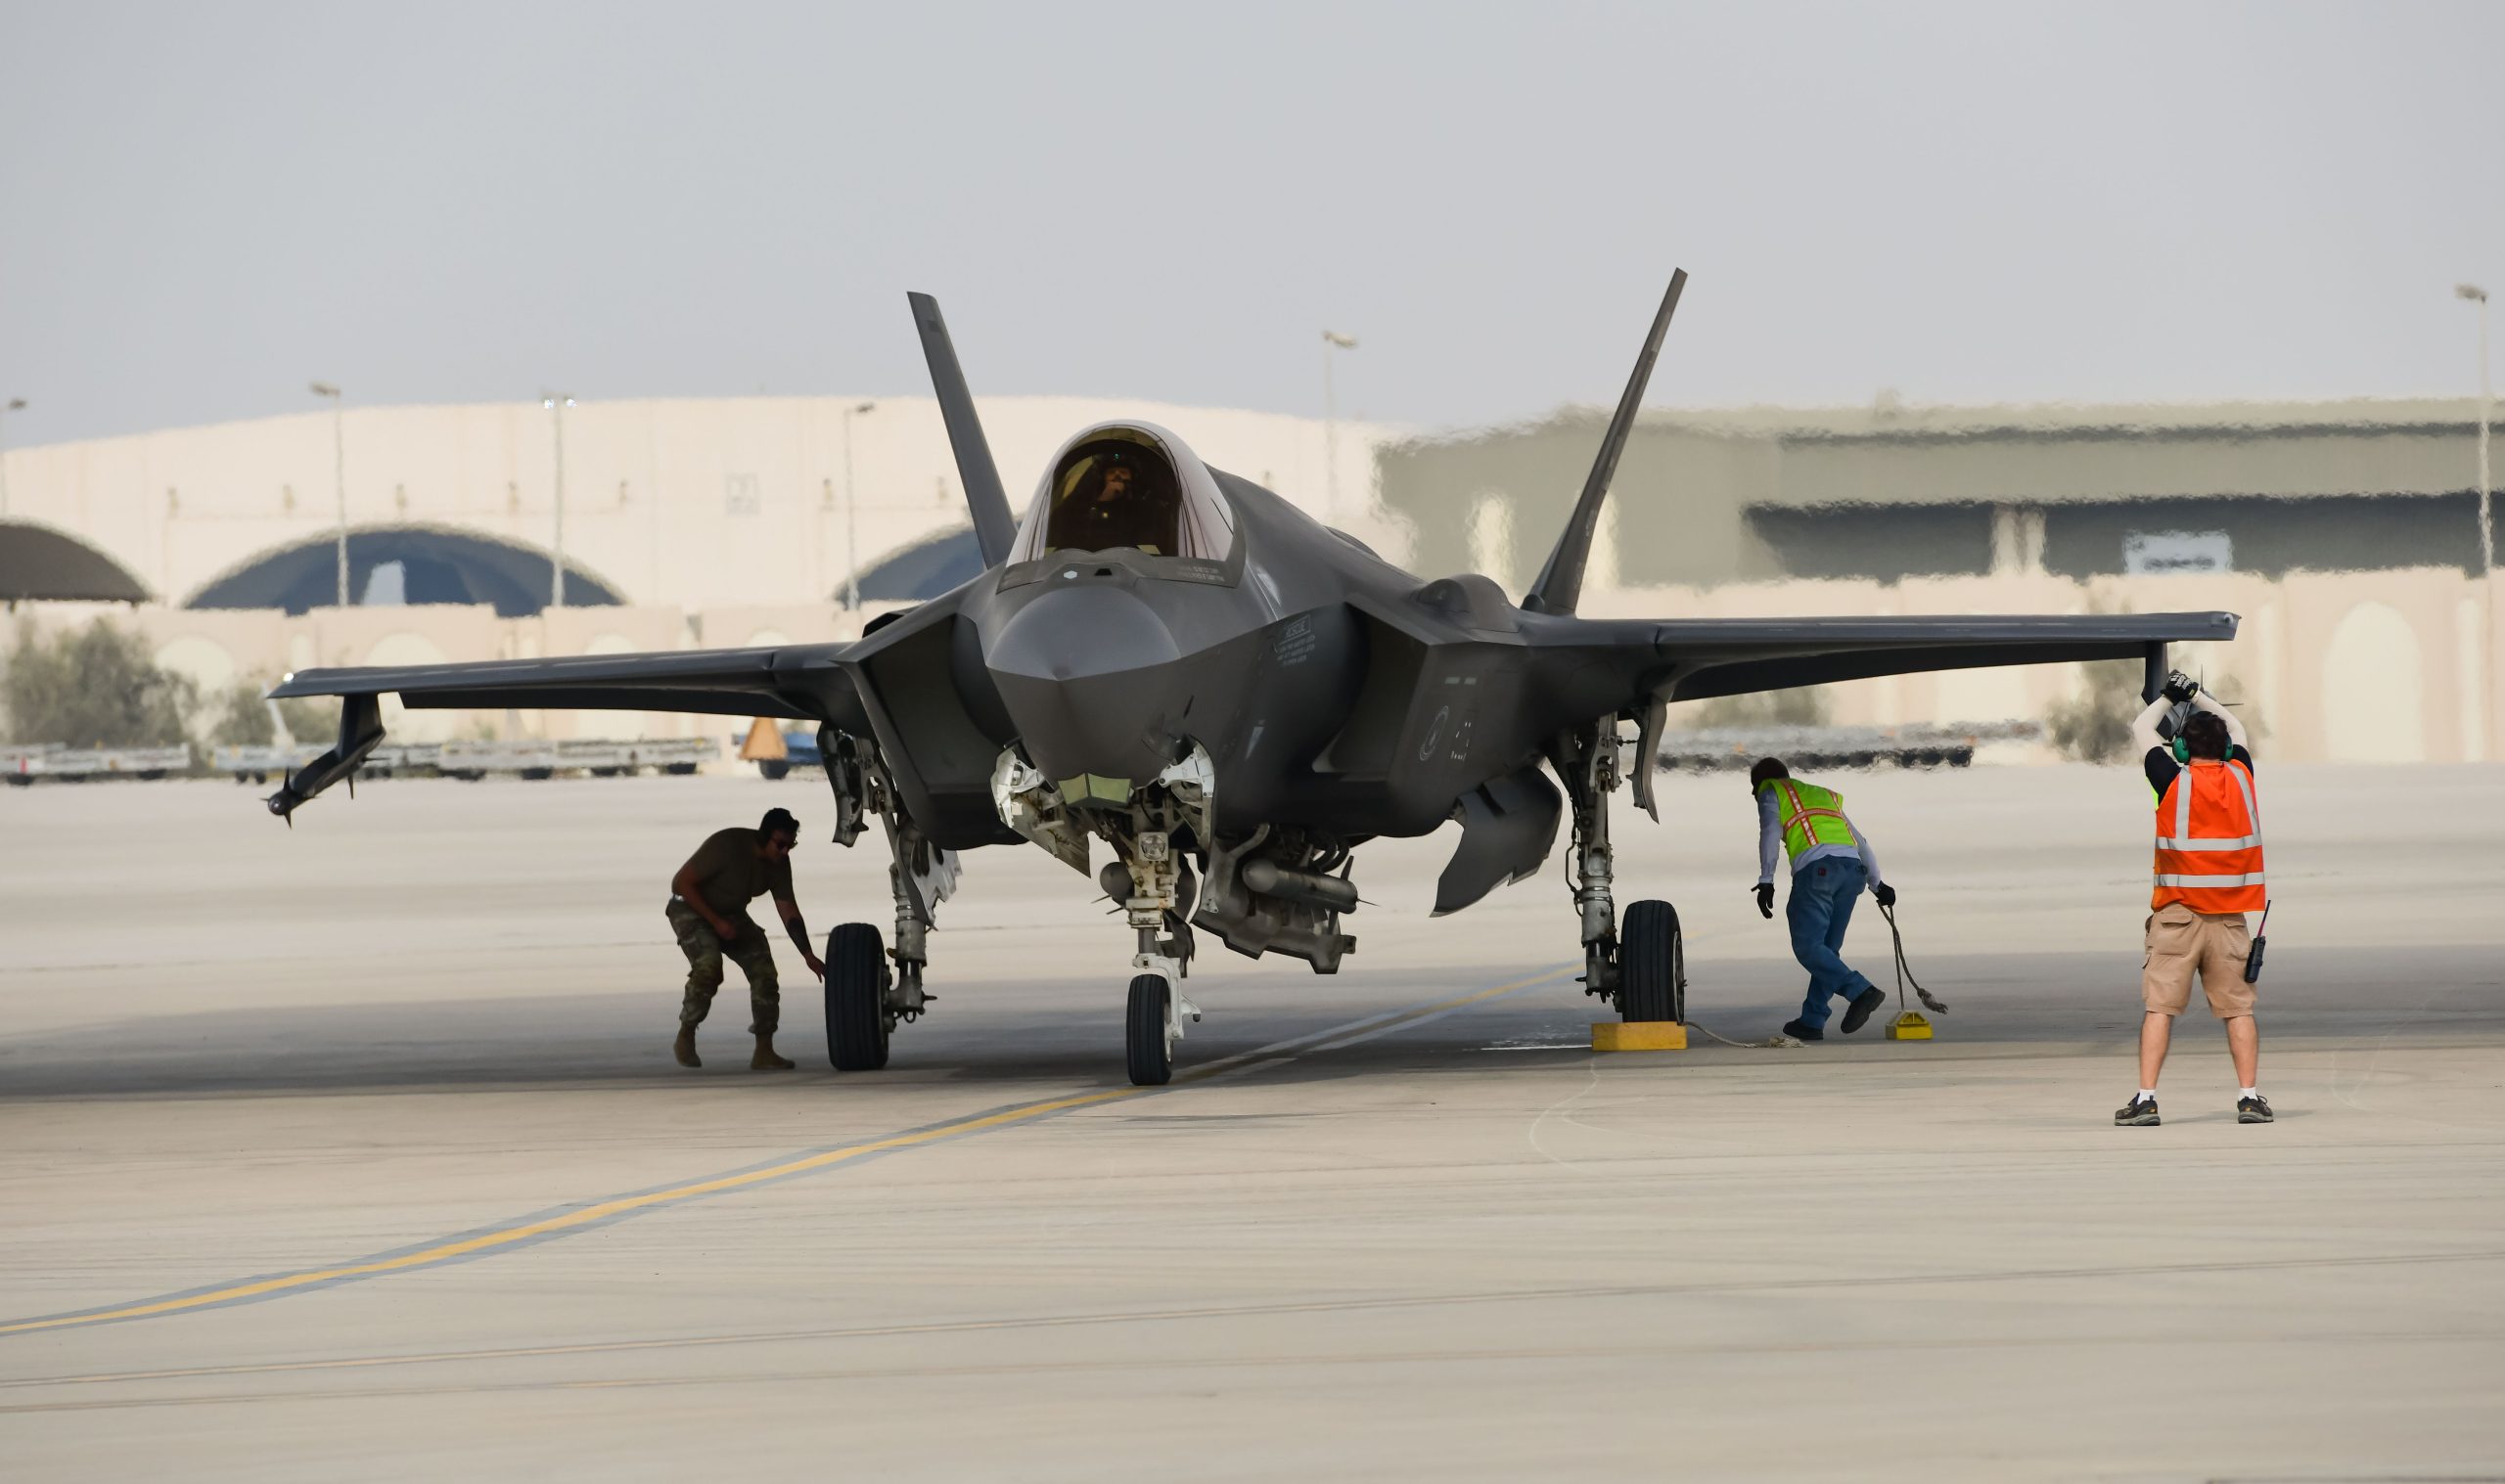 F-35 Deliveries On Hold Until Summer, But JPO May Accept Jets Without Proven TR-3